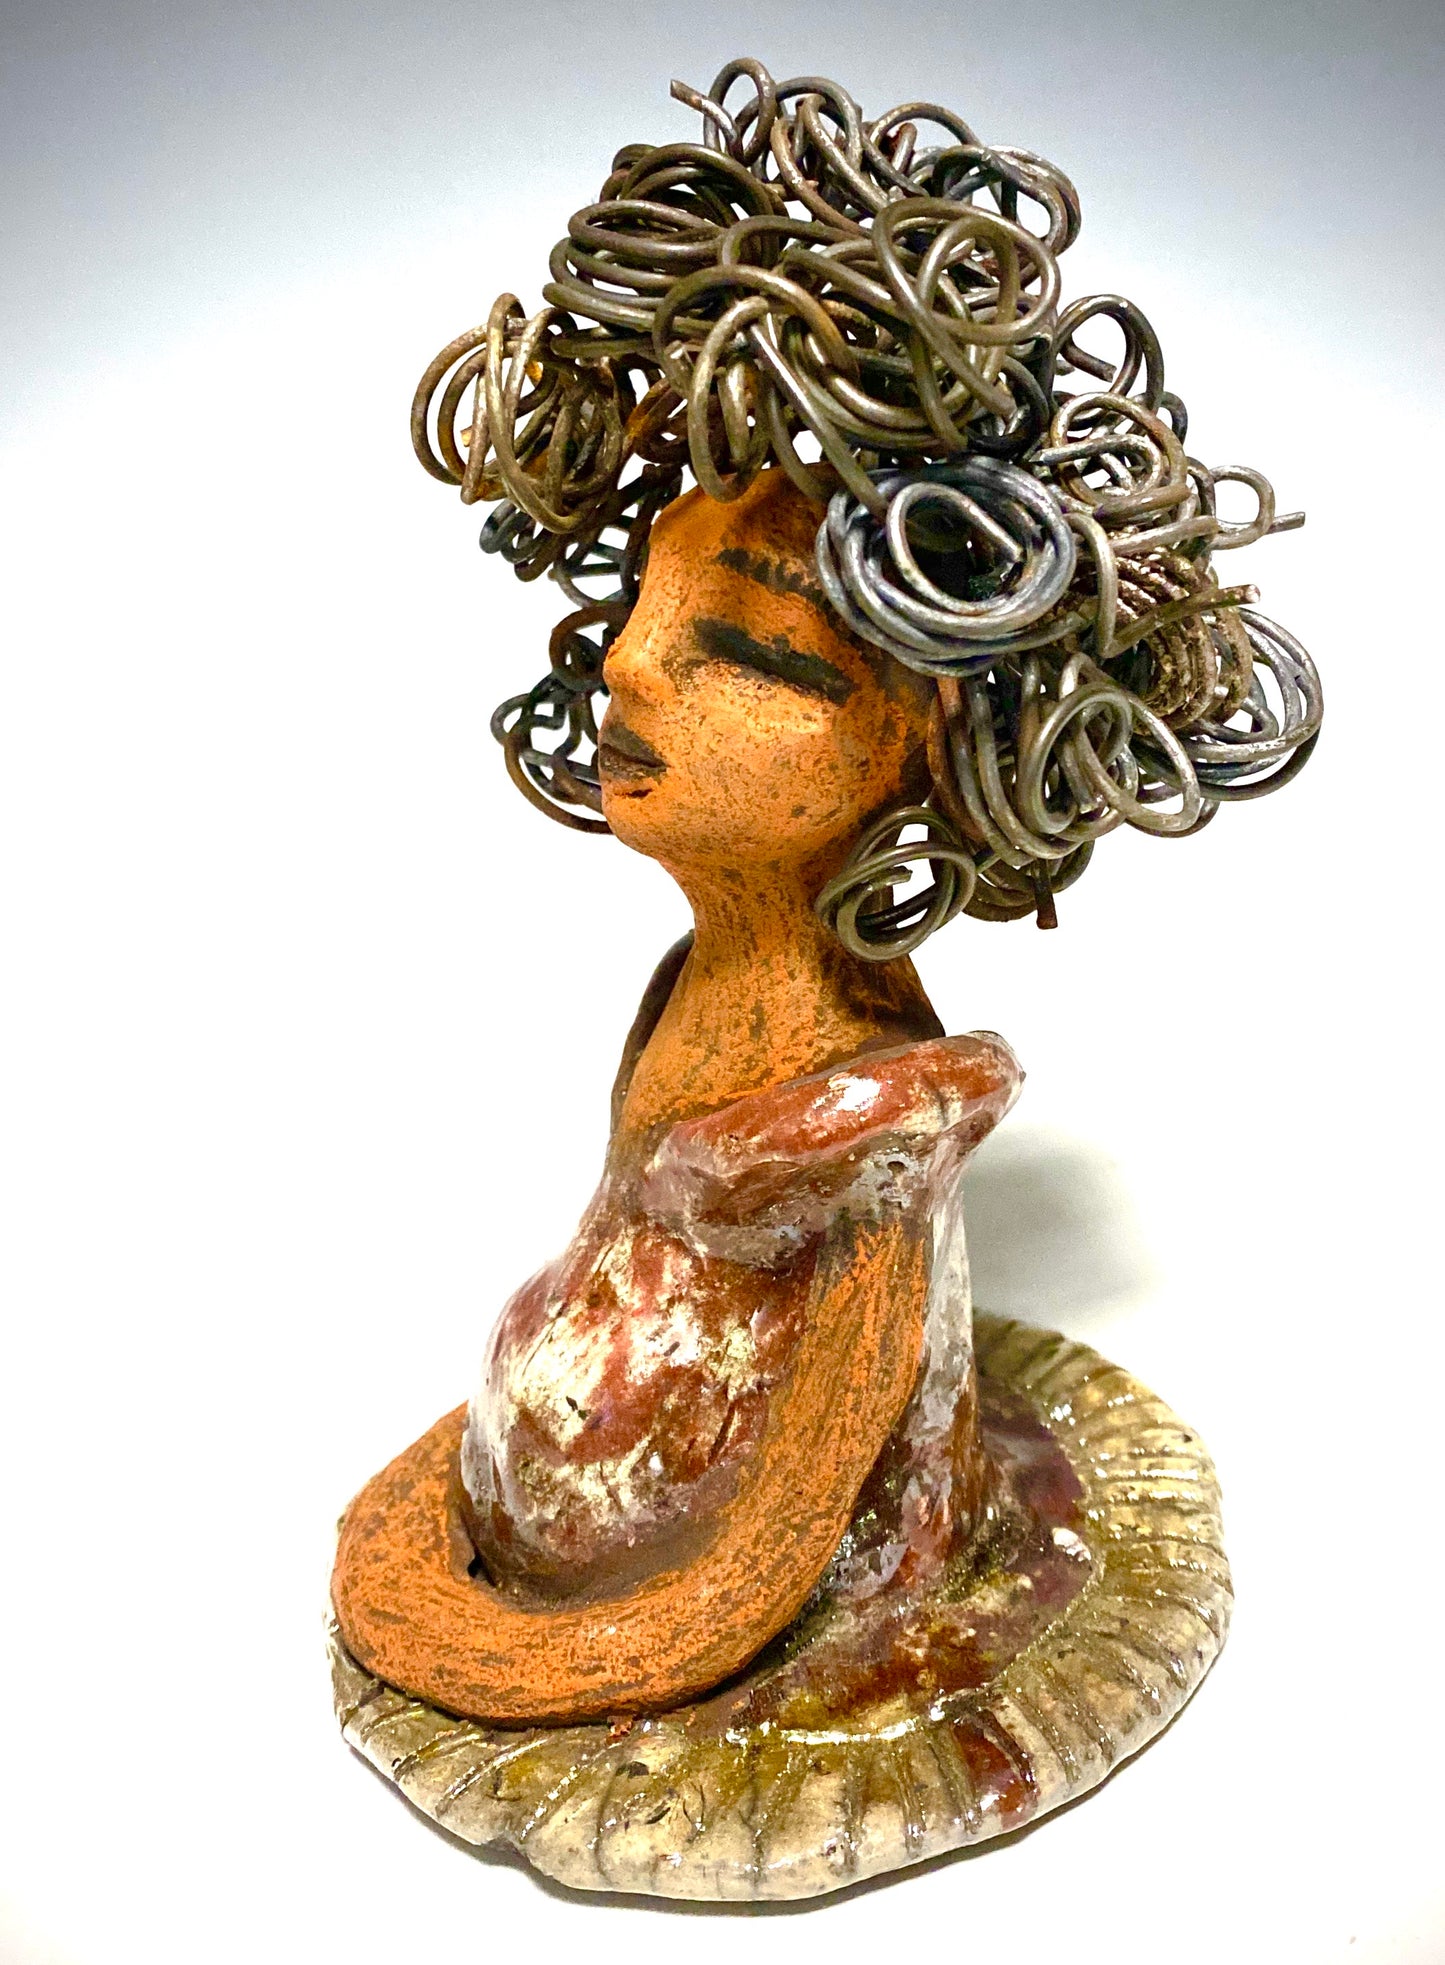 Meet Carleen! Carleen  stands 6" x 4" x 4" and weighs 12 ozs. Carleen has a honey brown complexion with 16 gauge curled wire hair. She wears an copper metallic dress. Carleen  has her long loving arms at her side as she rest and waits.